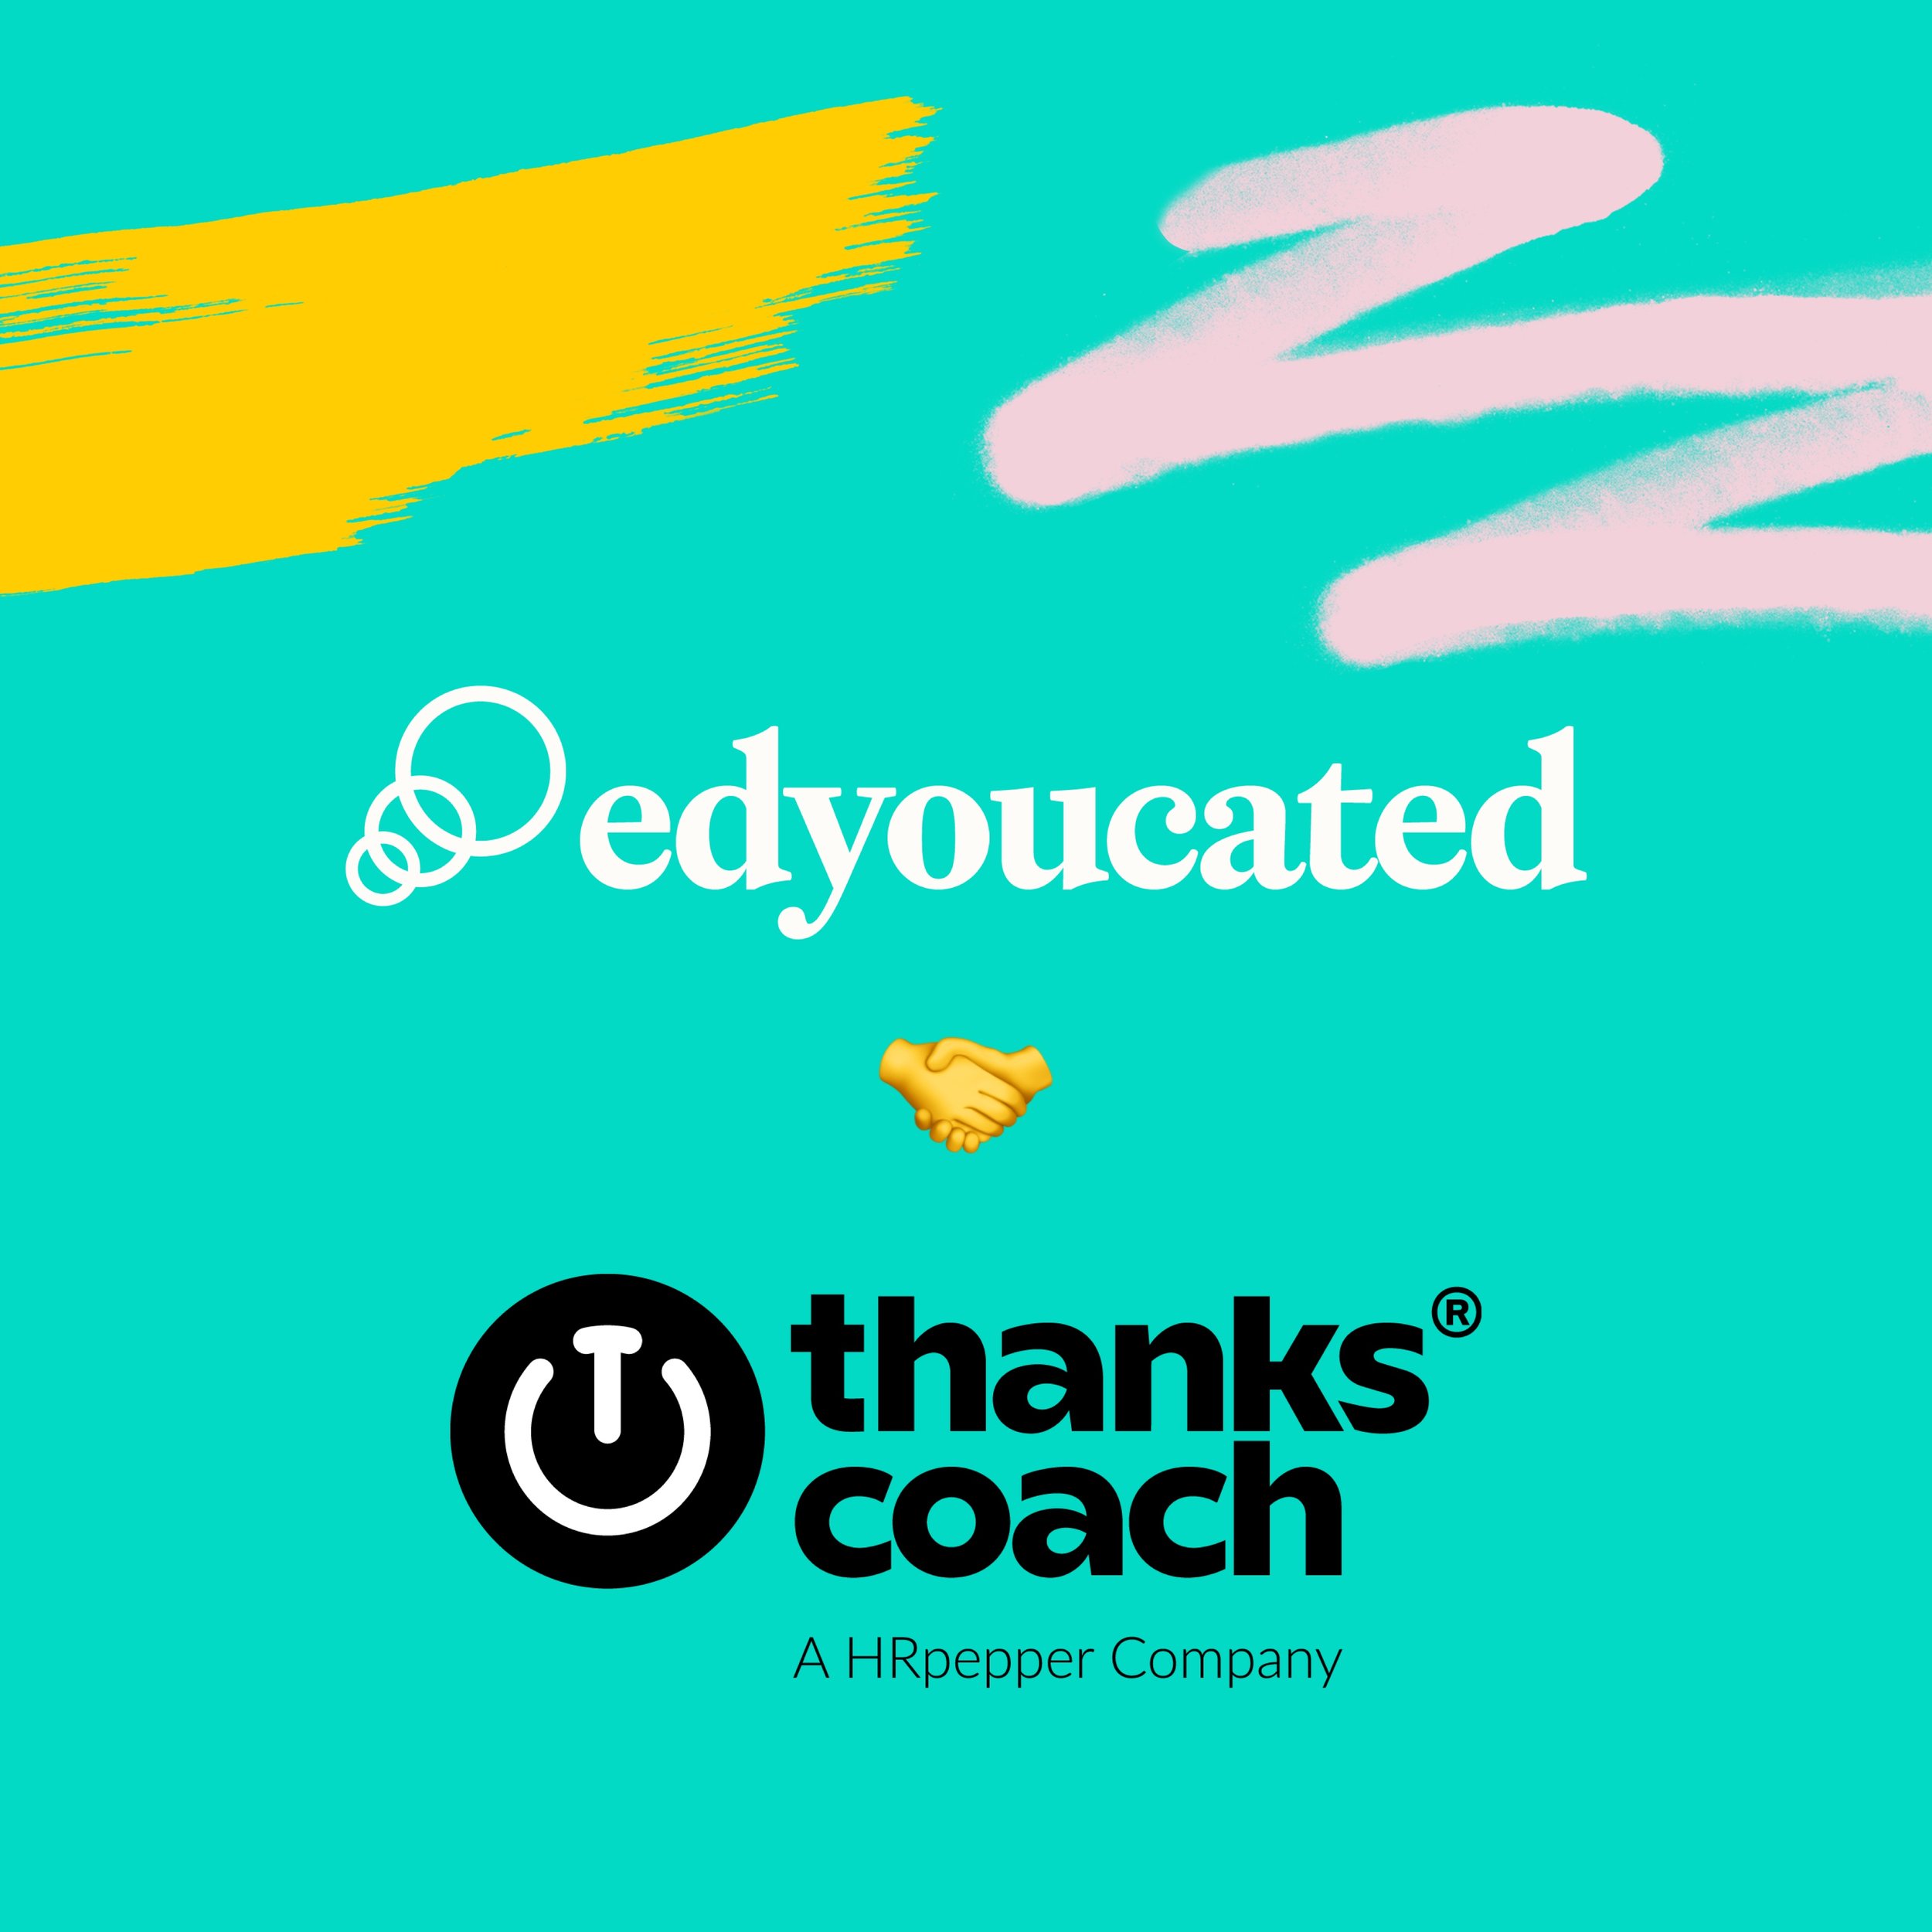 Introducing: Our new partner edyoucated